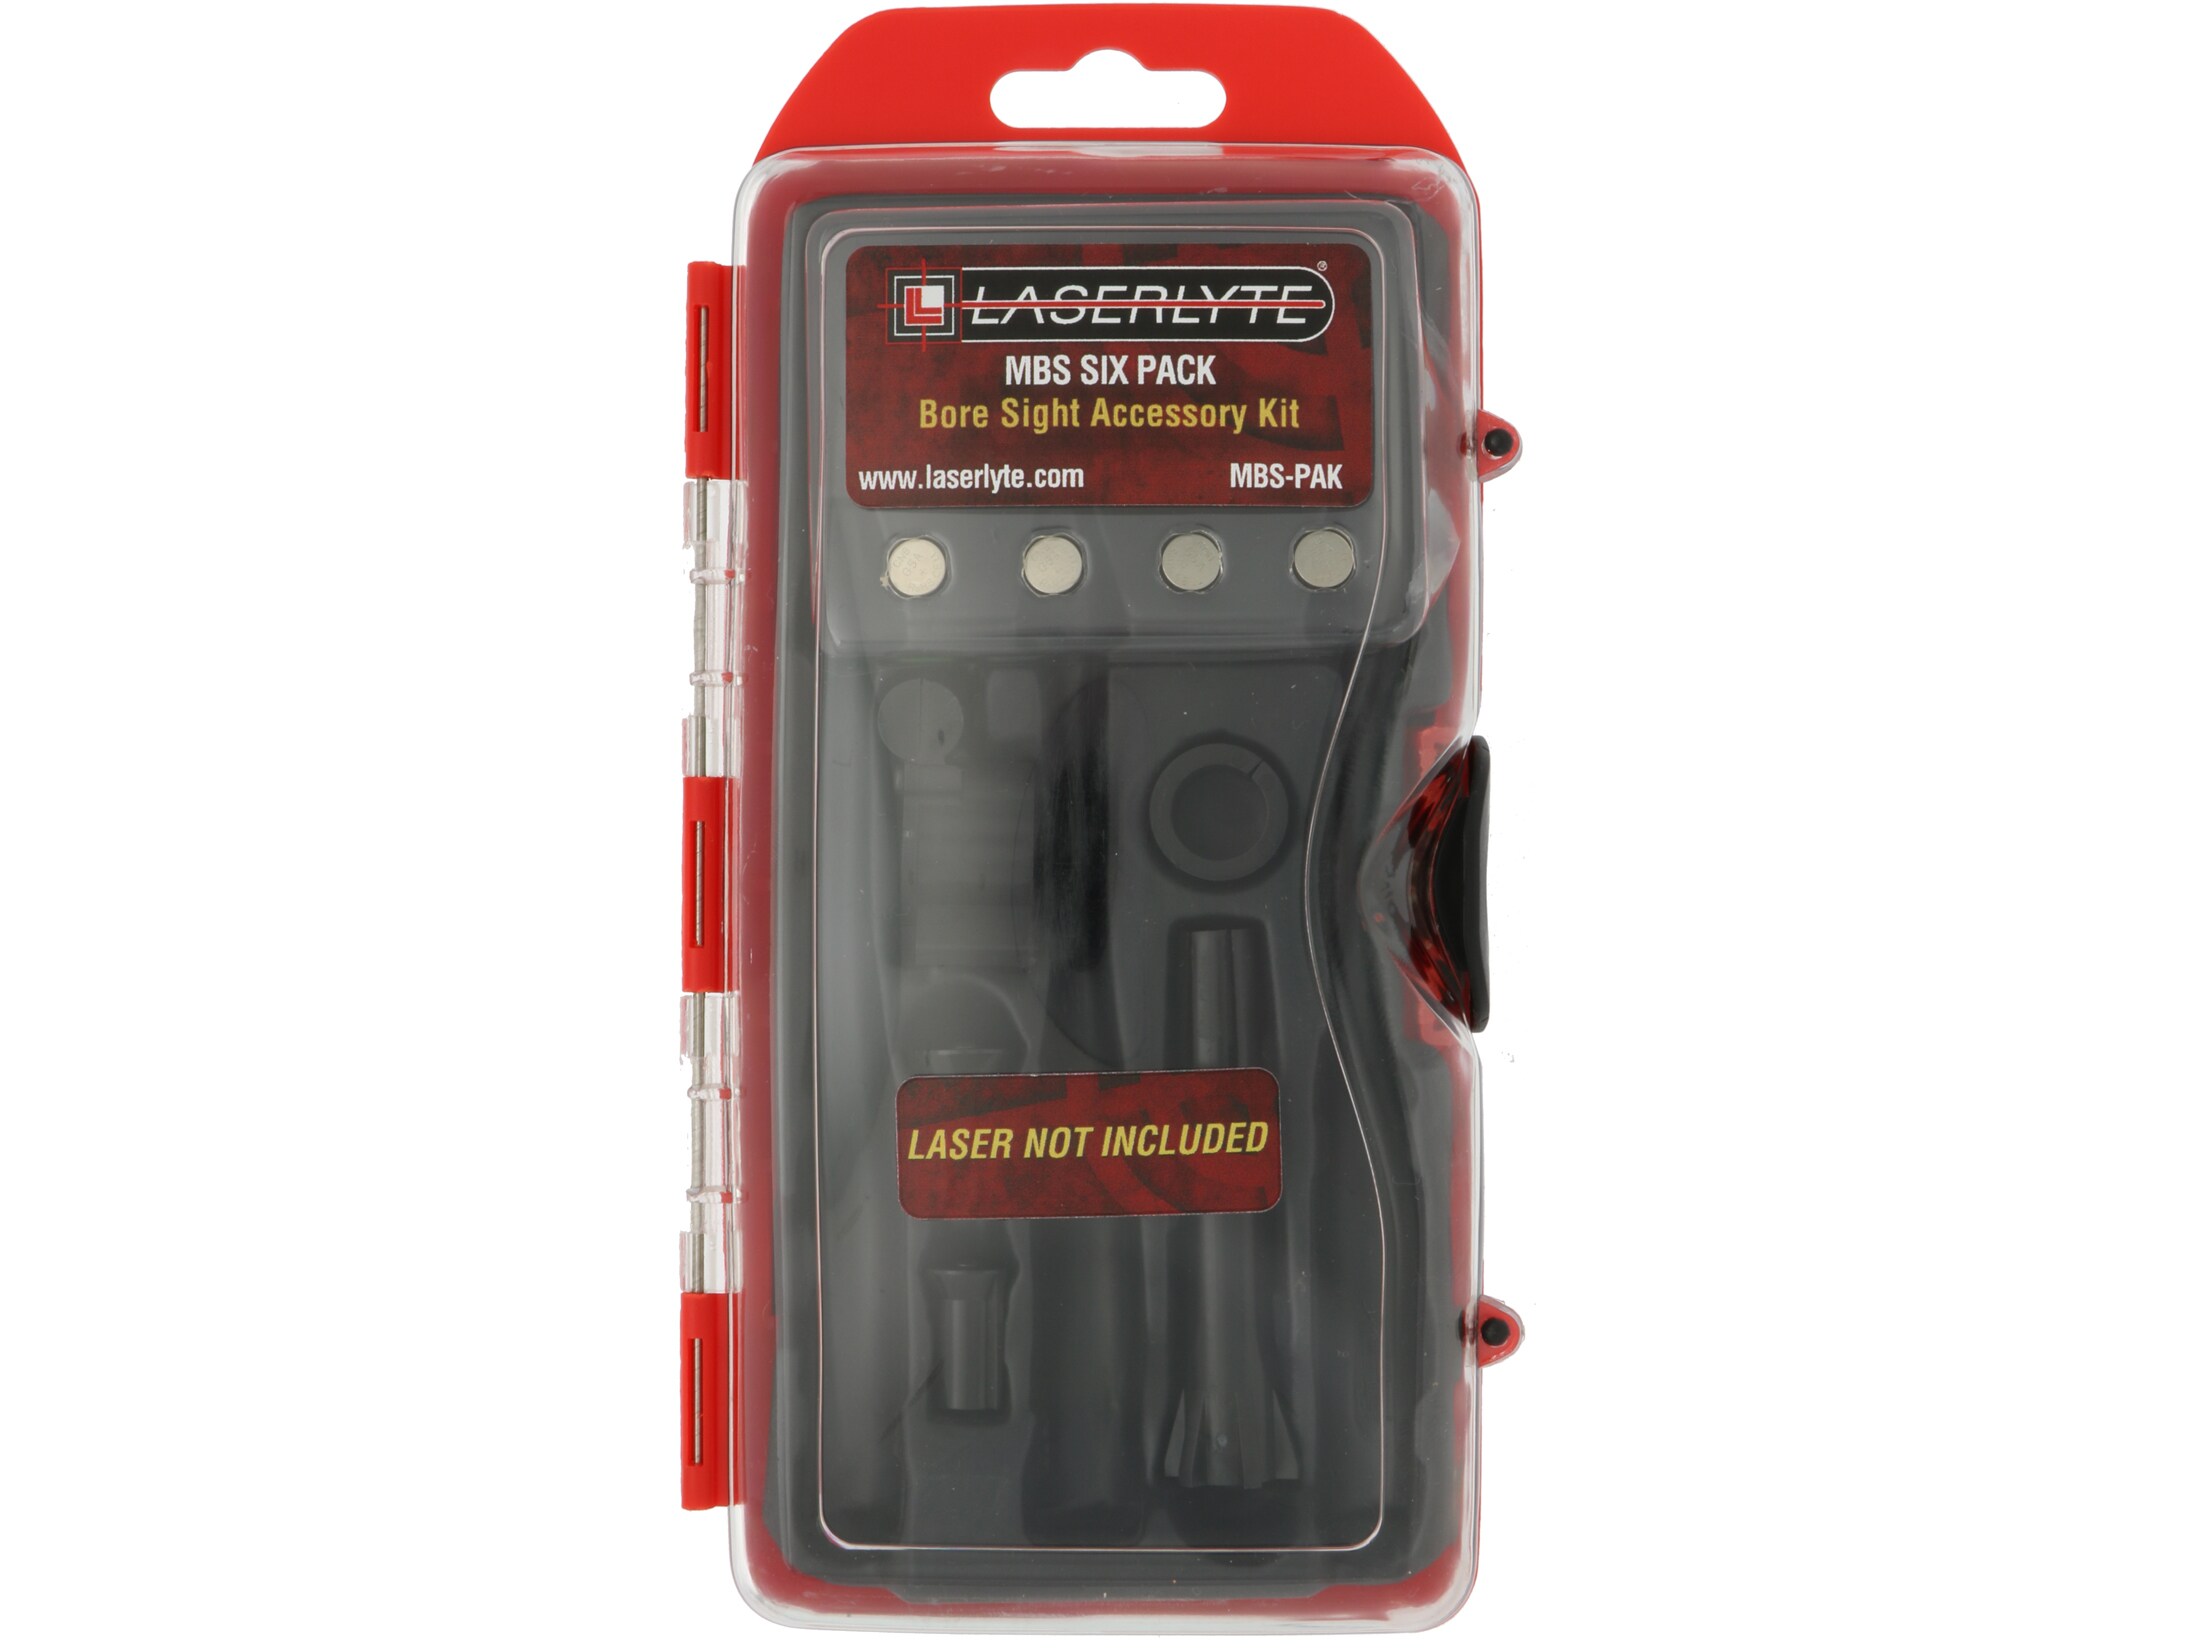 LaserLyte Laser Bore Sight Accessory Kit For Sale